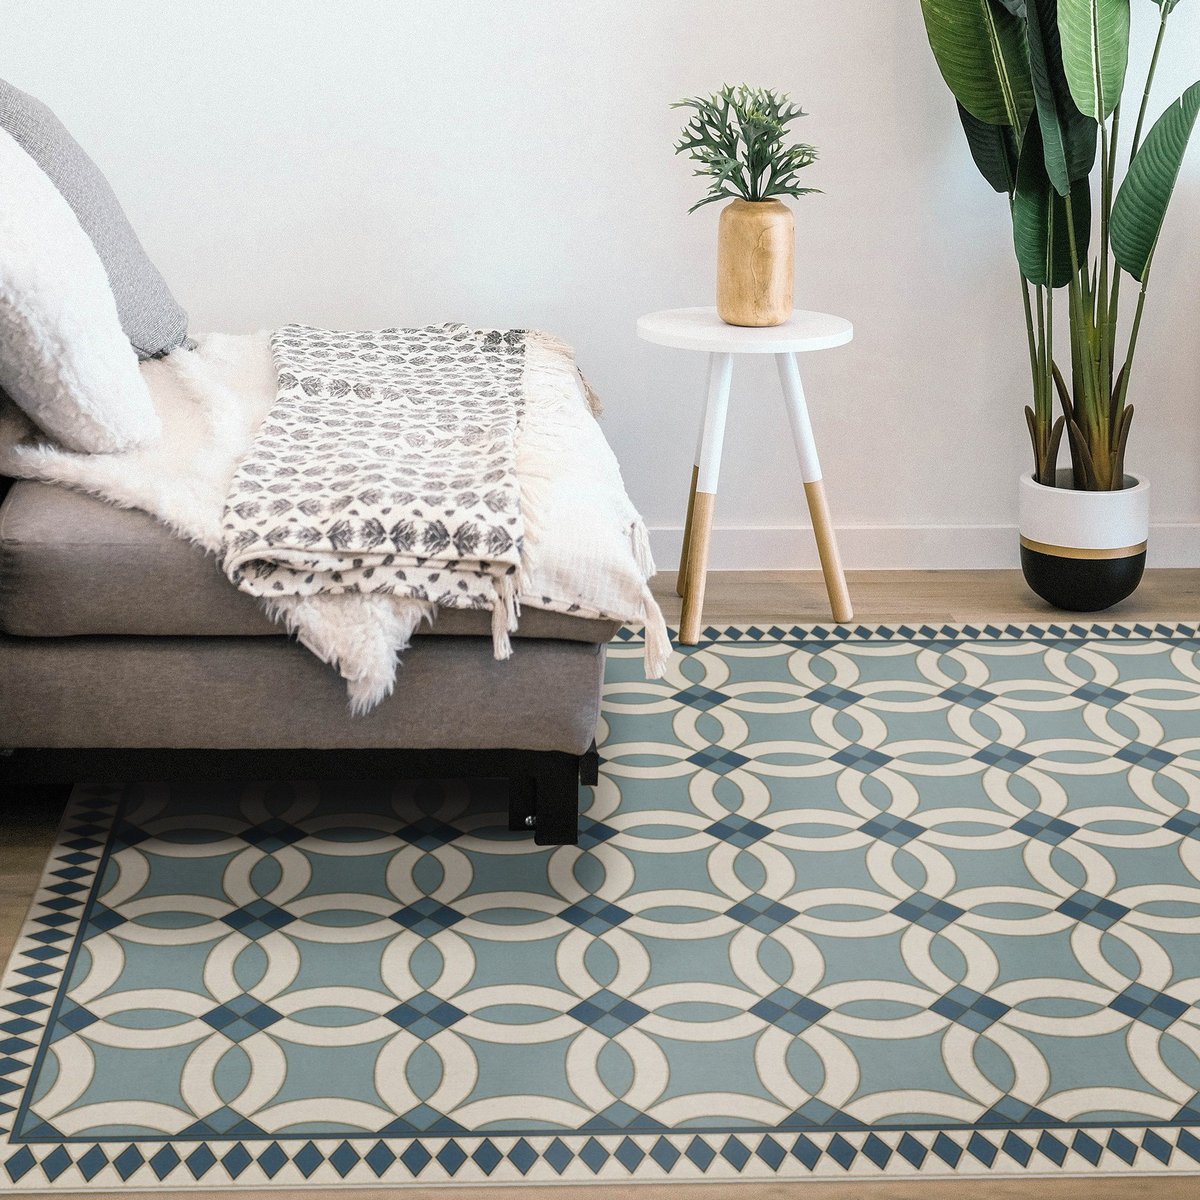 Durable Rugs for High-Traffic Spaces, and How to Make Them Last